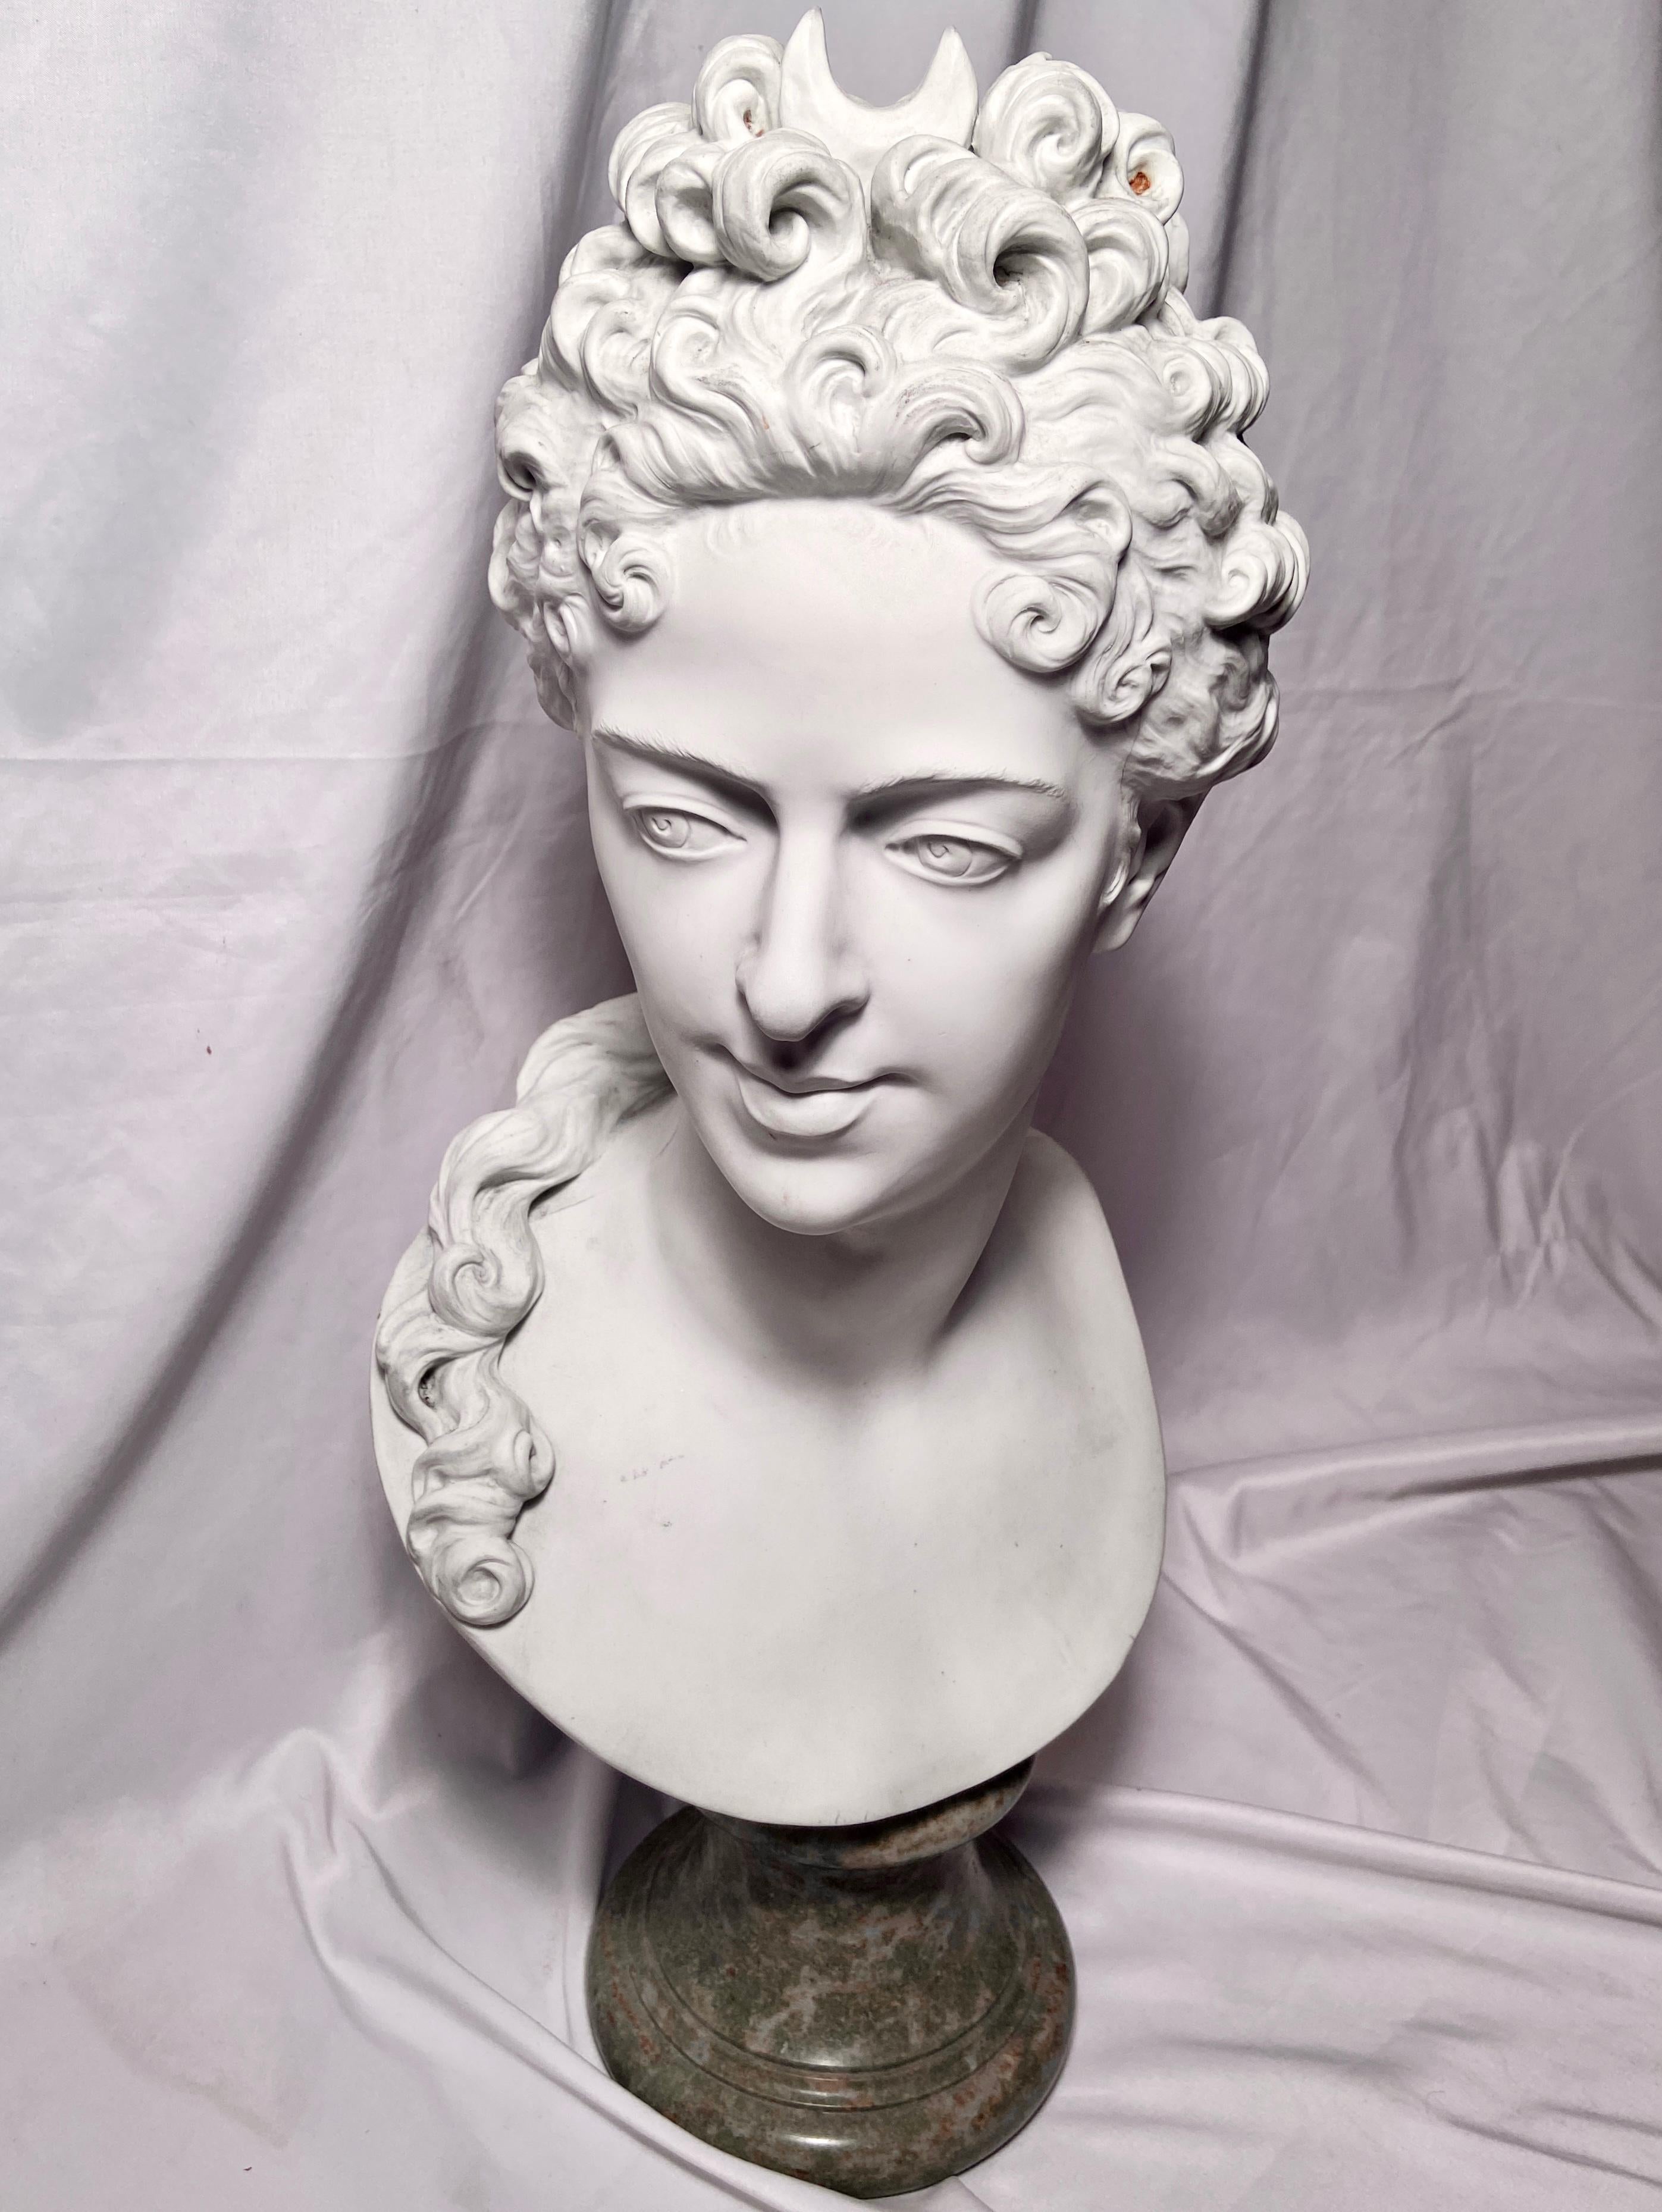 Antique 19th century French bisque porcelain bust of Diana, goddess of the hunt.